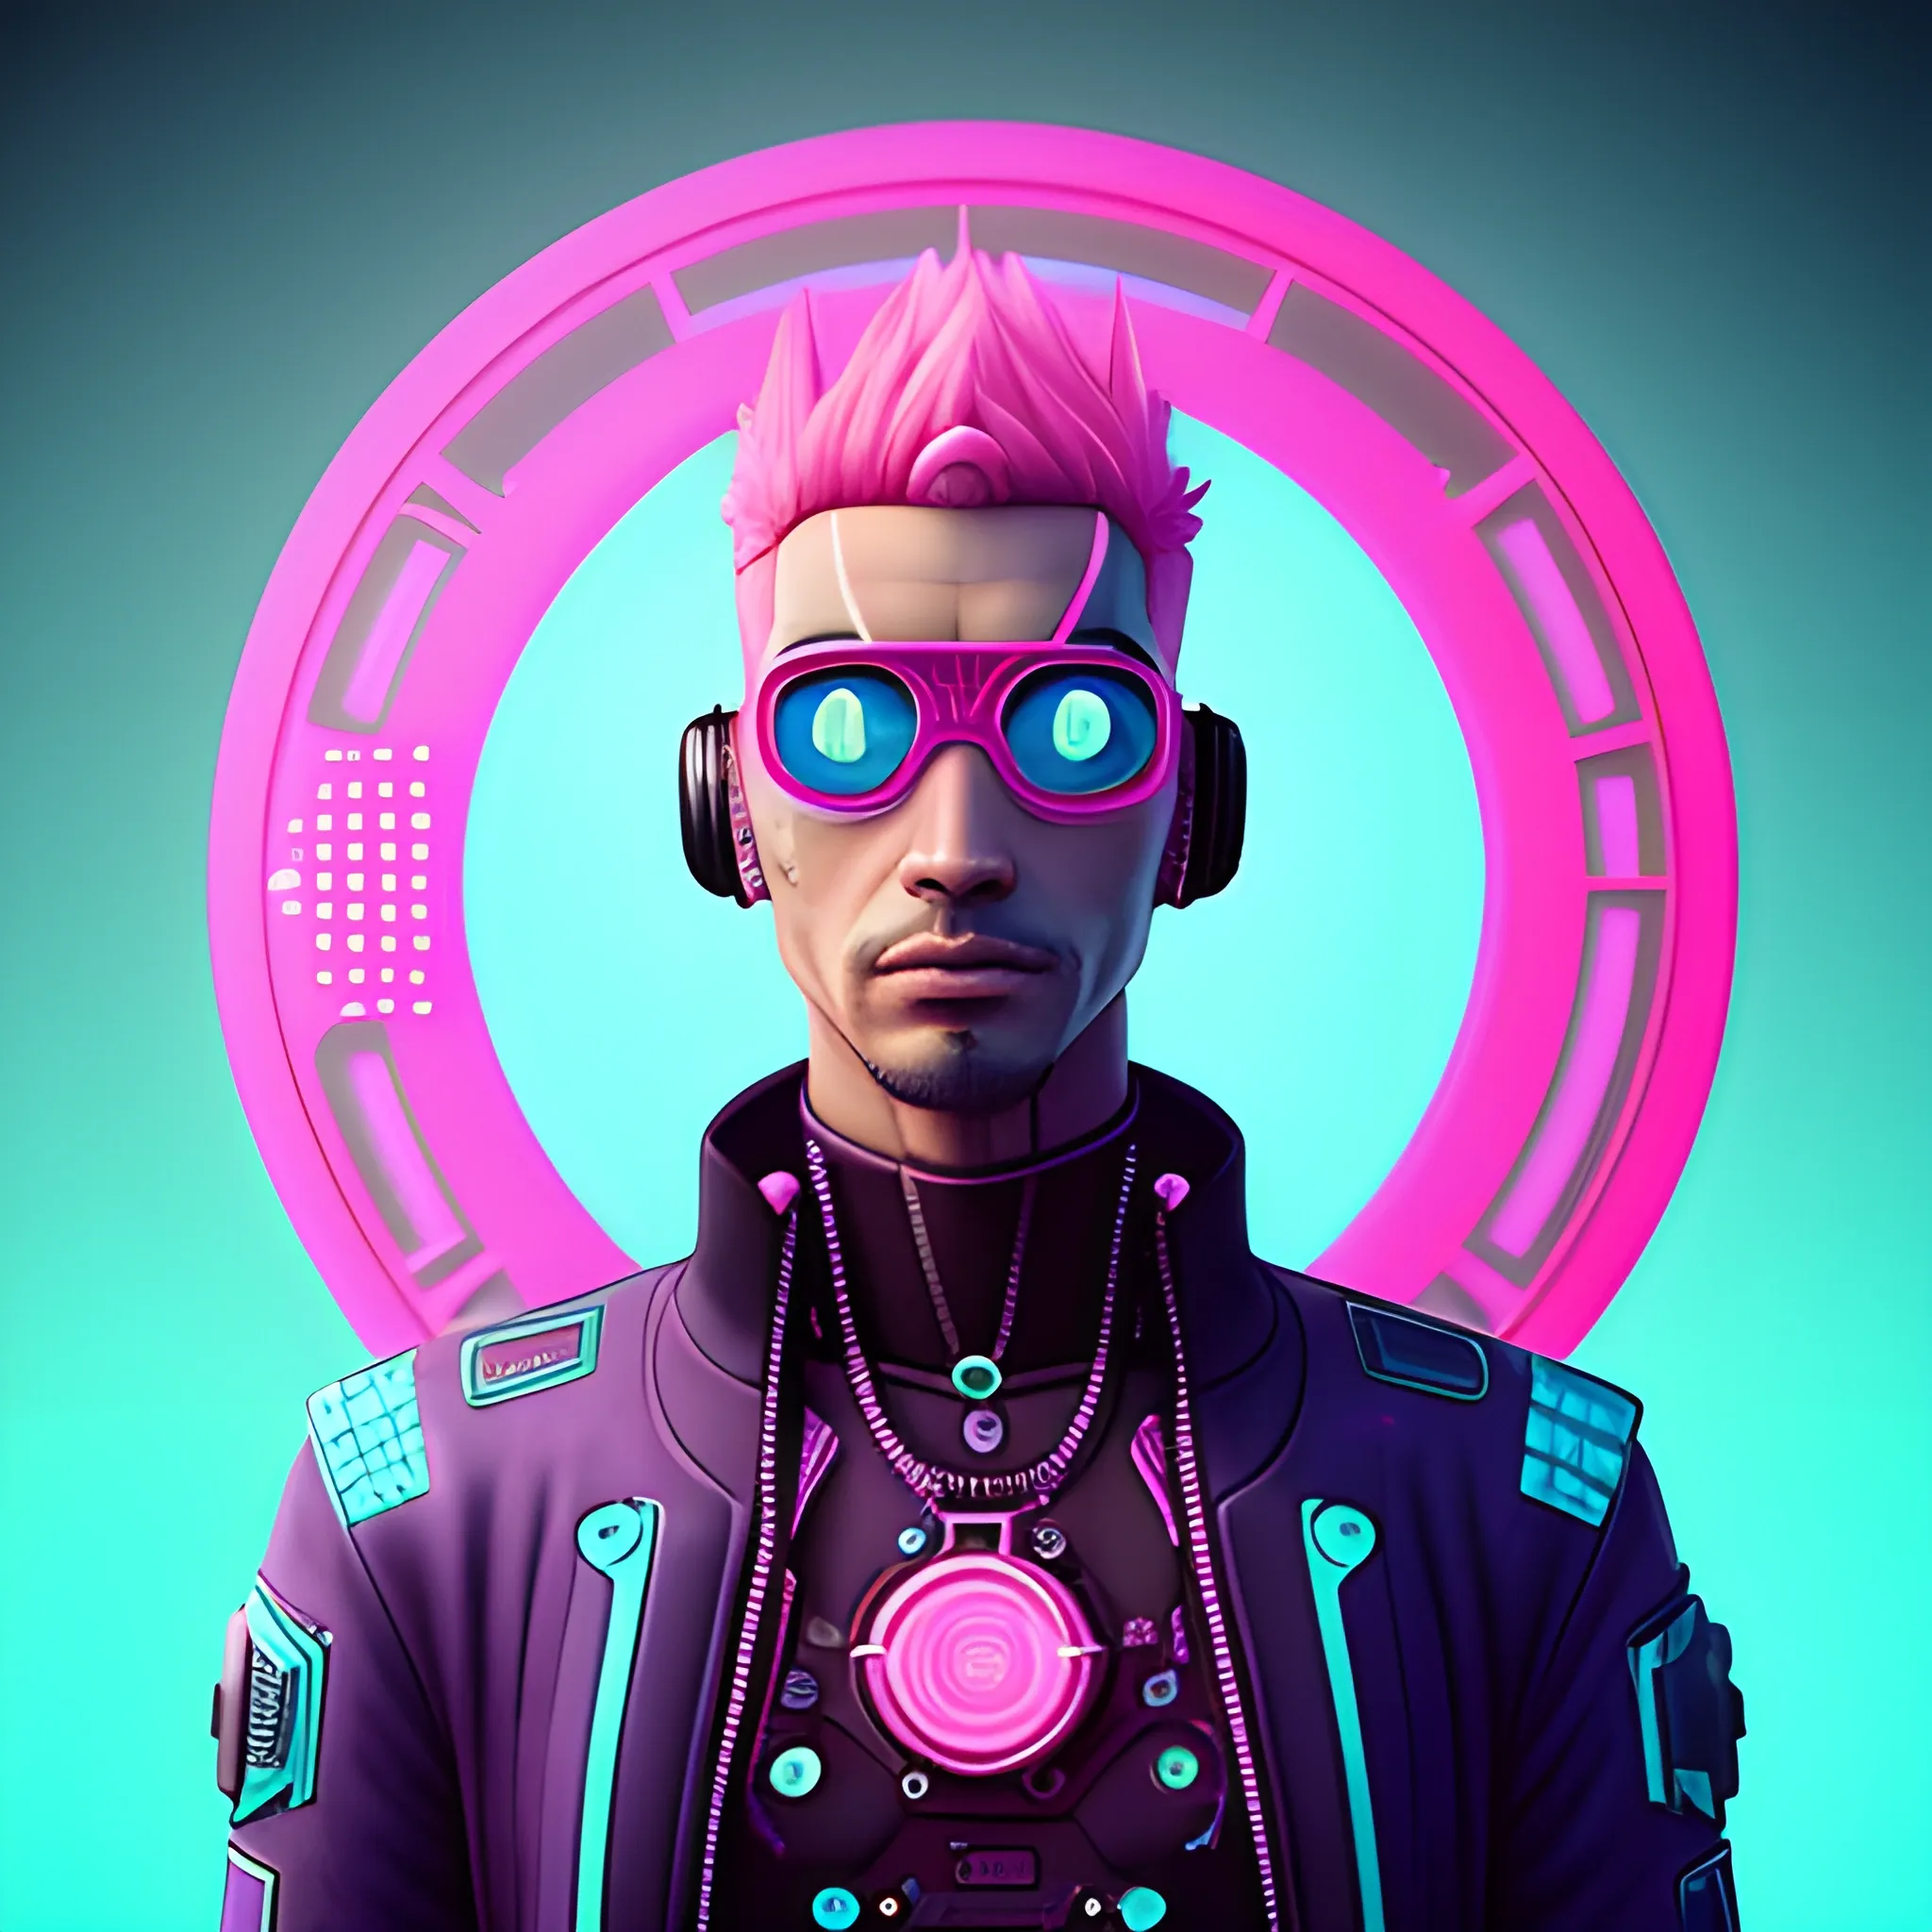 3D, Sci-Fi, Hip-hop, Urban, pink and cyan colored, circular male cyberpunk avatar, high-definition, realistic, intricate wavelength detailing, embossed circular frame, 